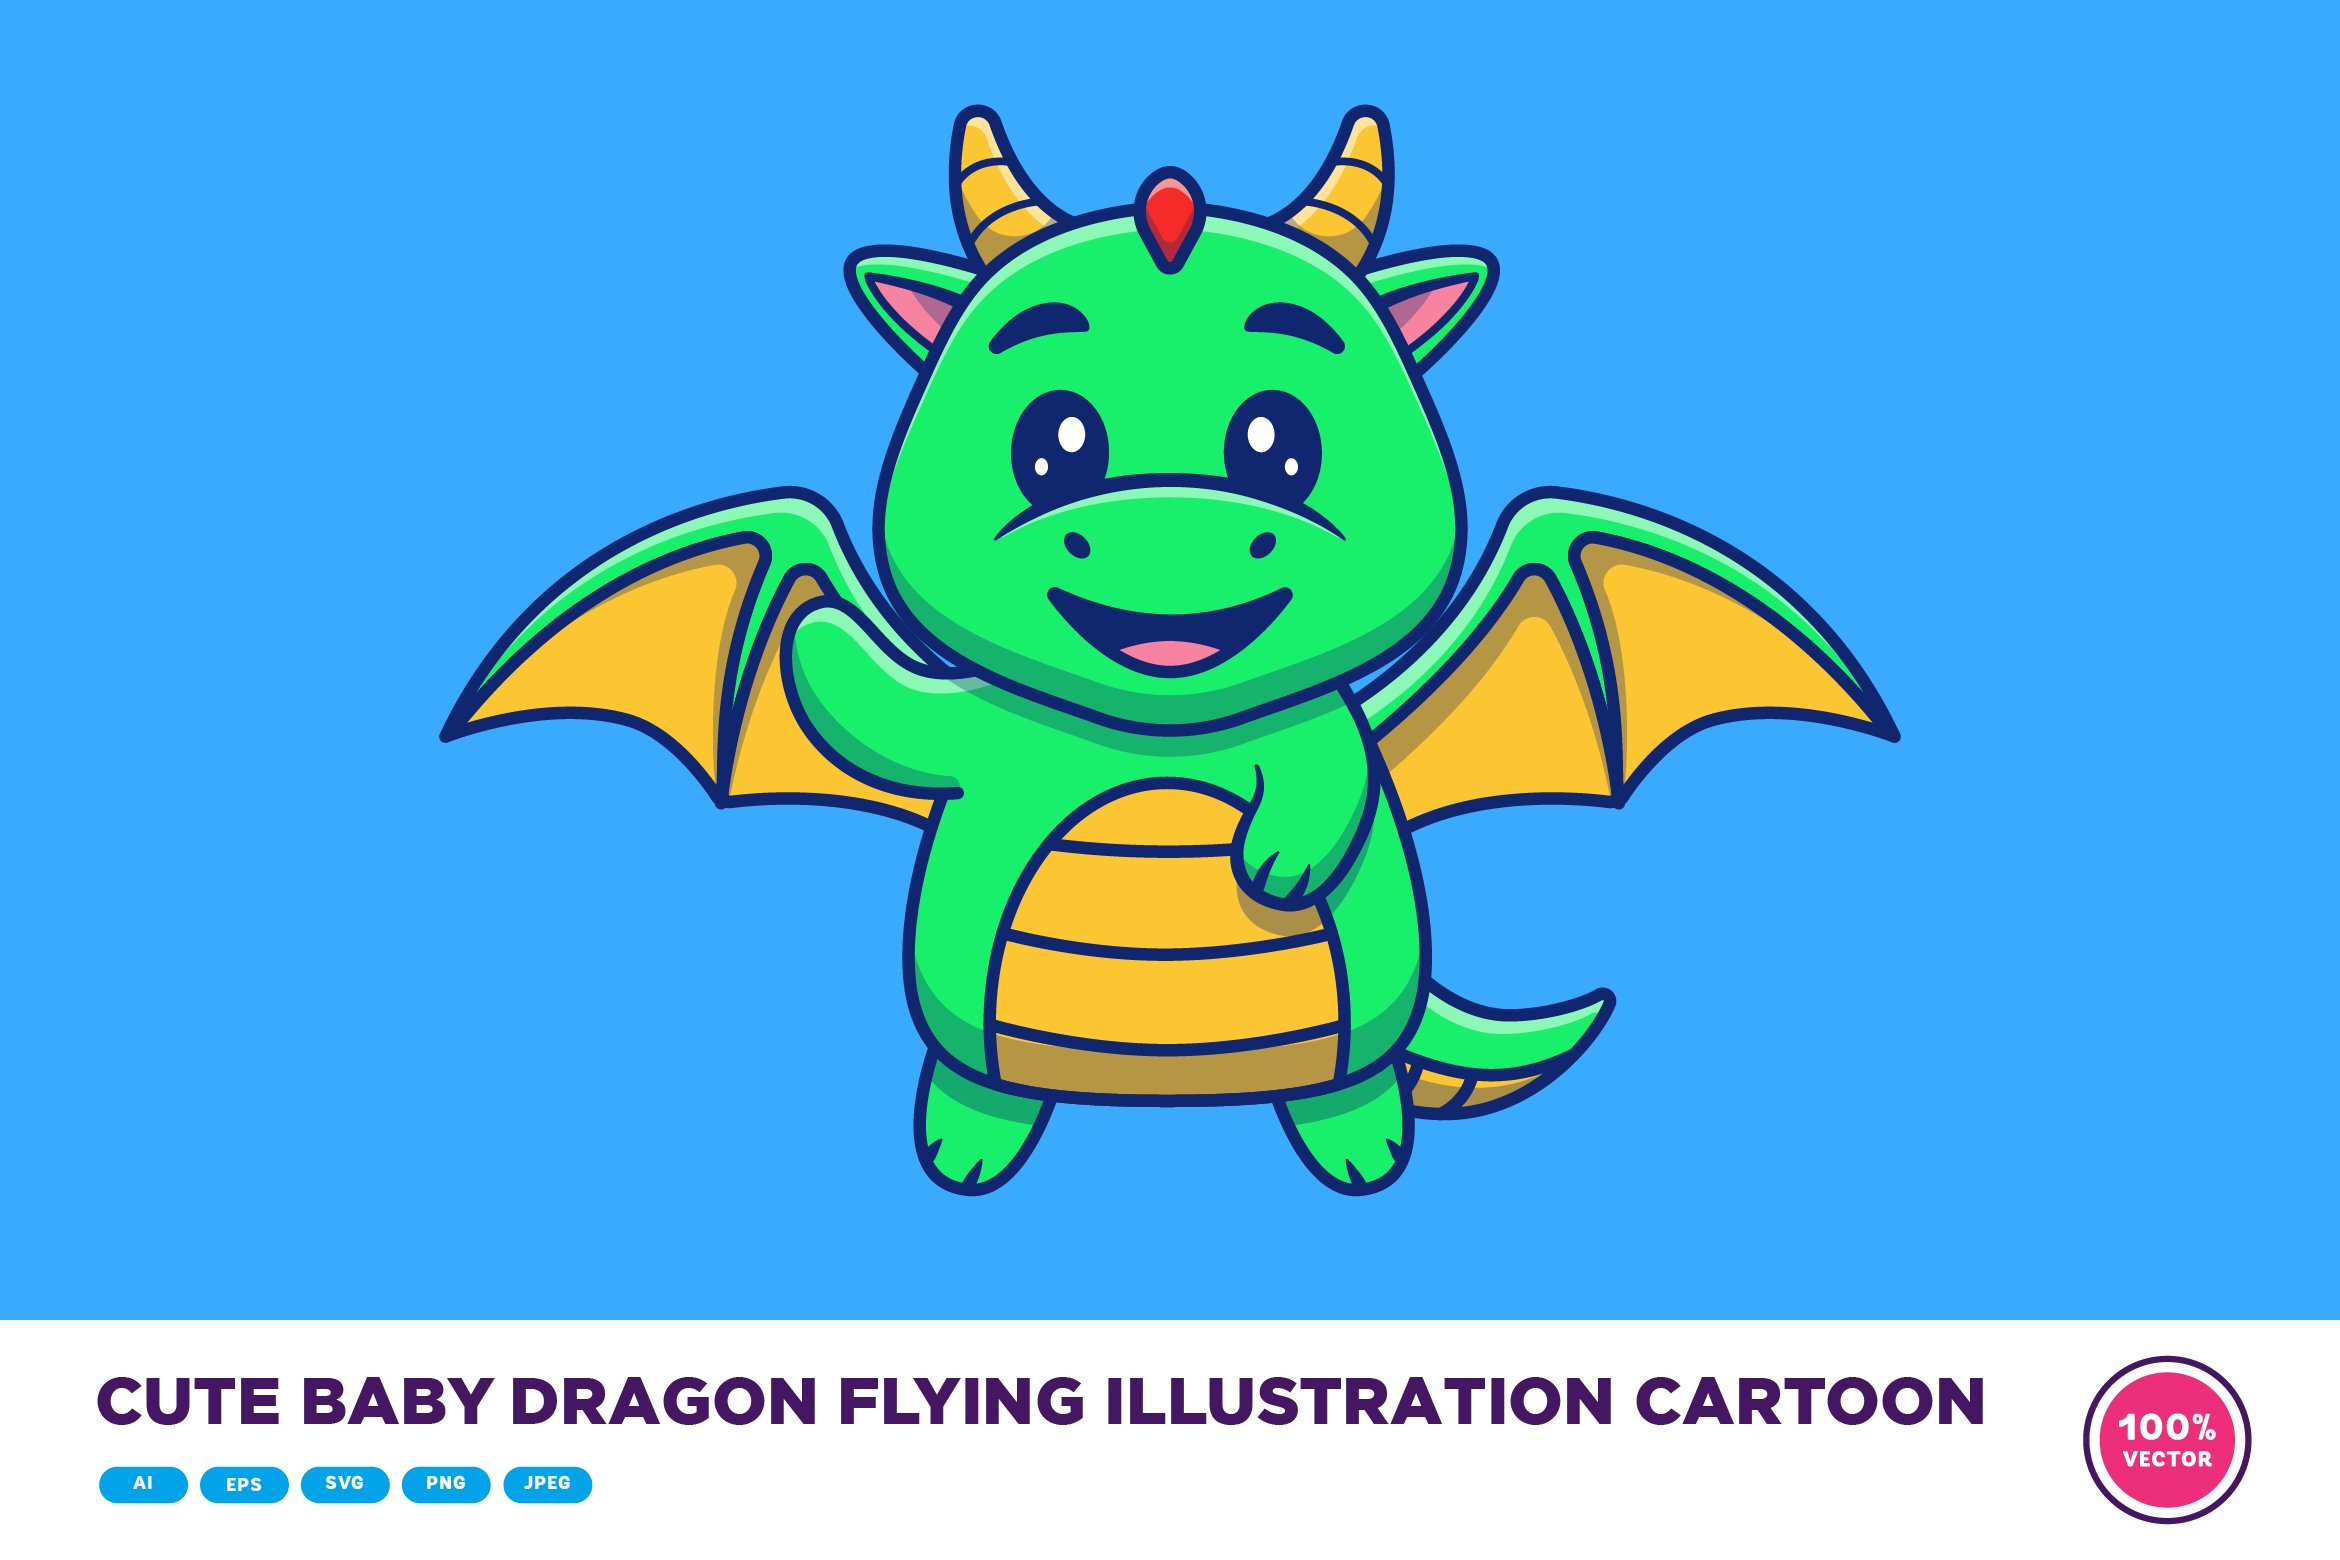 Cute Baby Dragon Flying Illustration cover image.